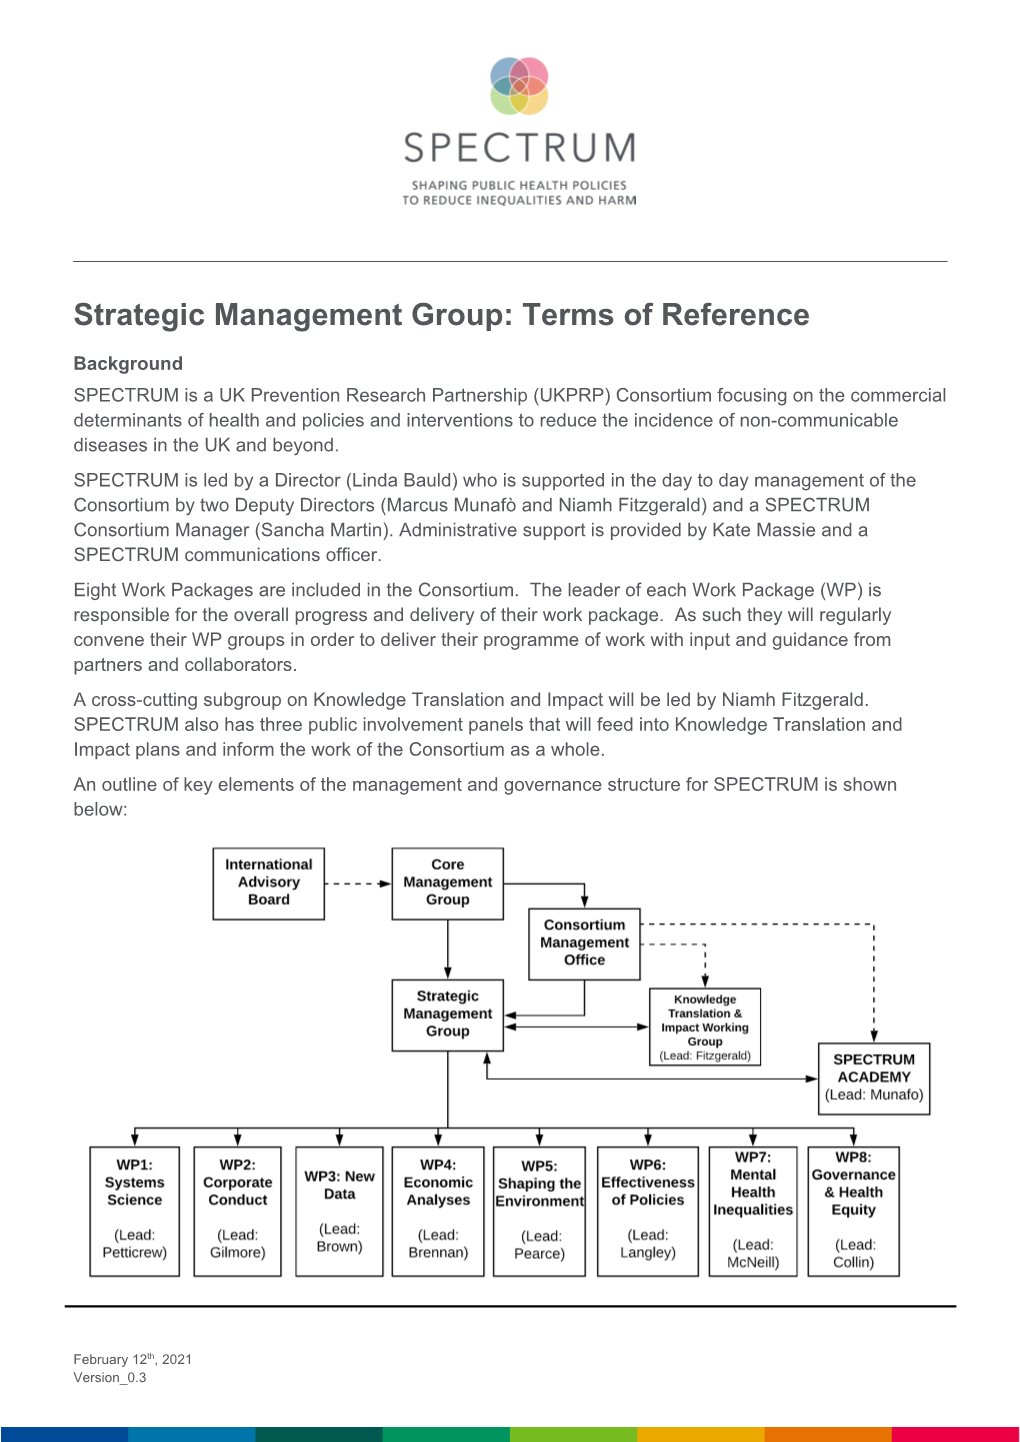 SPECTRUM Strategic Management Group Terms of Reference